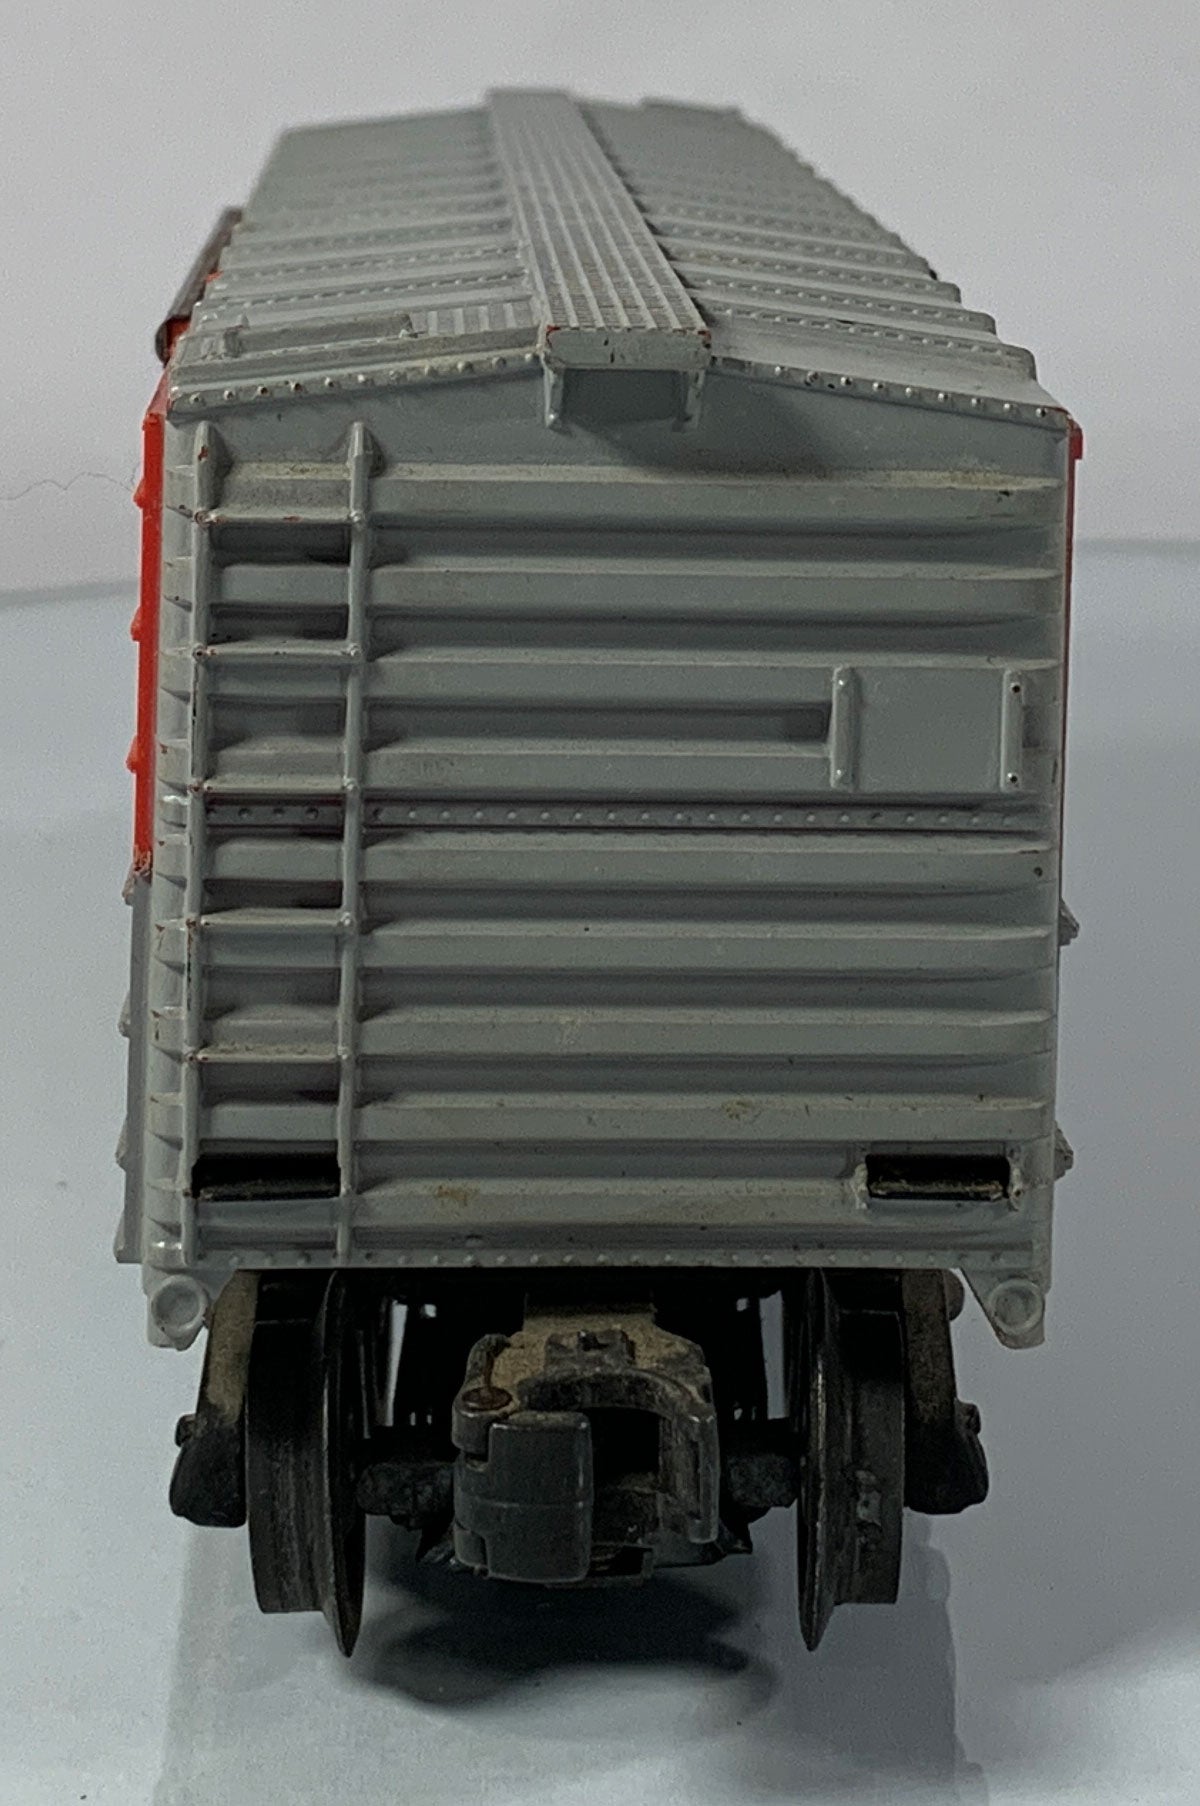 LIONEL • O GAUGE • 1955 Postwar 3494-1 NYC Pacemaker Operating Boxcar • Loose • VERY GOOD COND